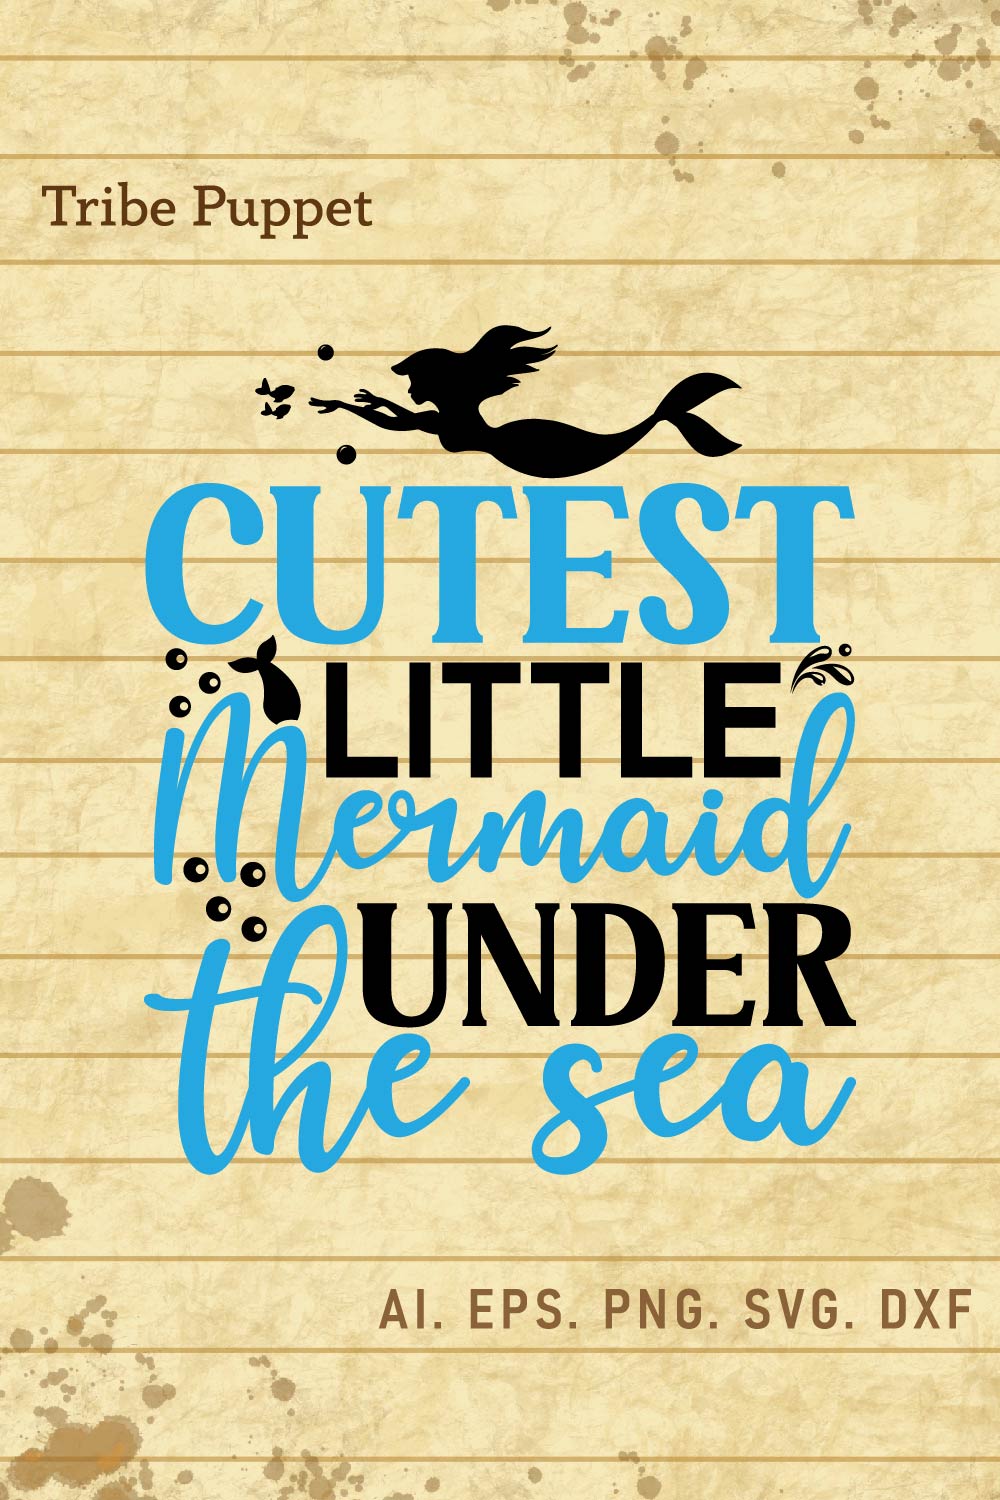 Mermaid Quotes pinterest preview image.